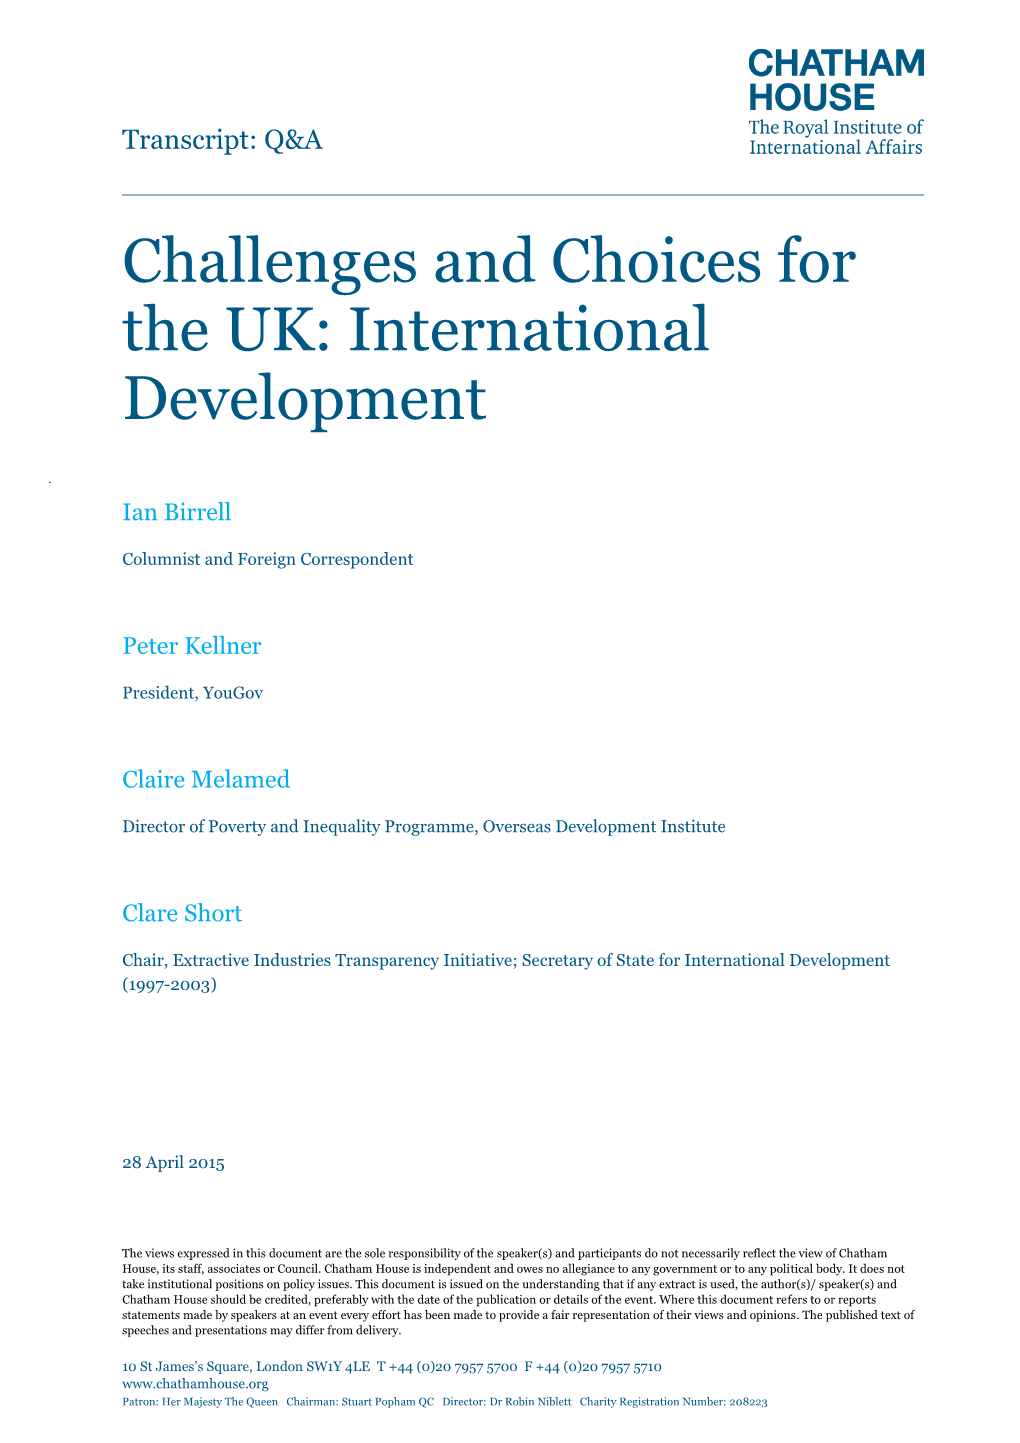 Challenges and Choices for the UK: International Development